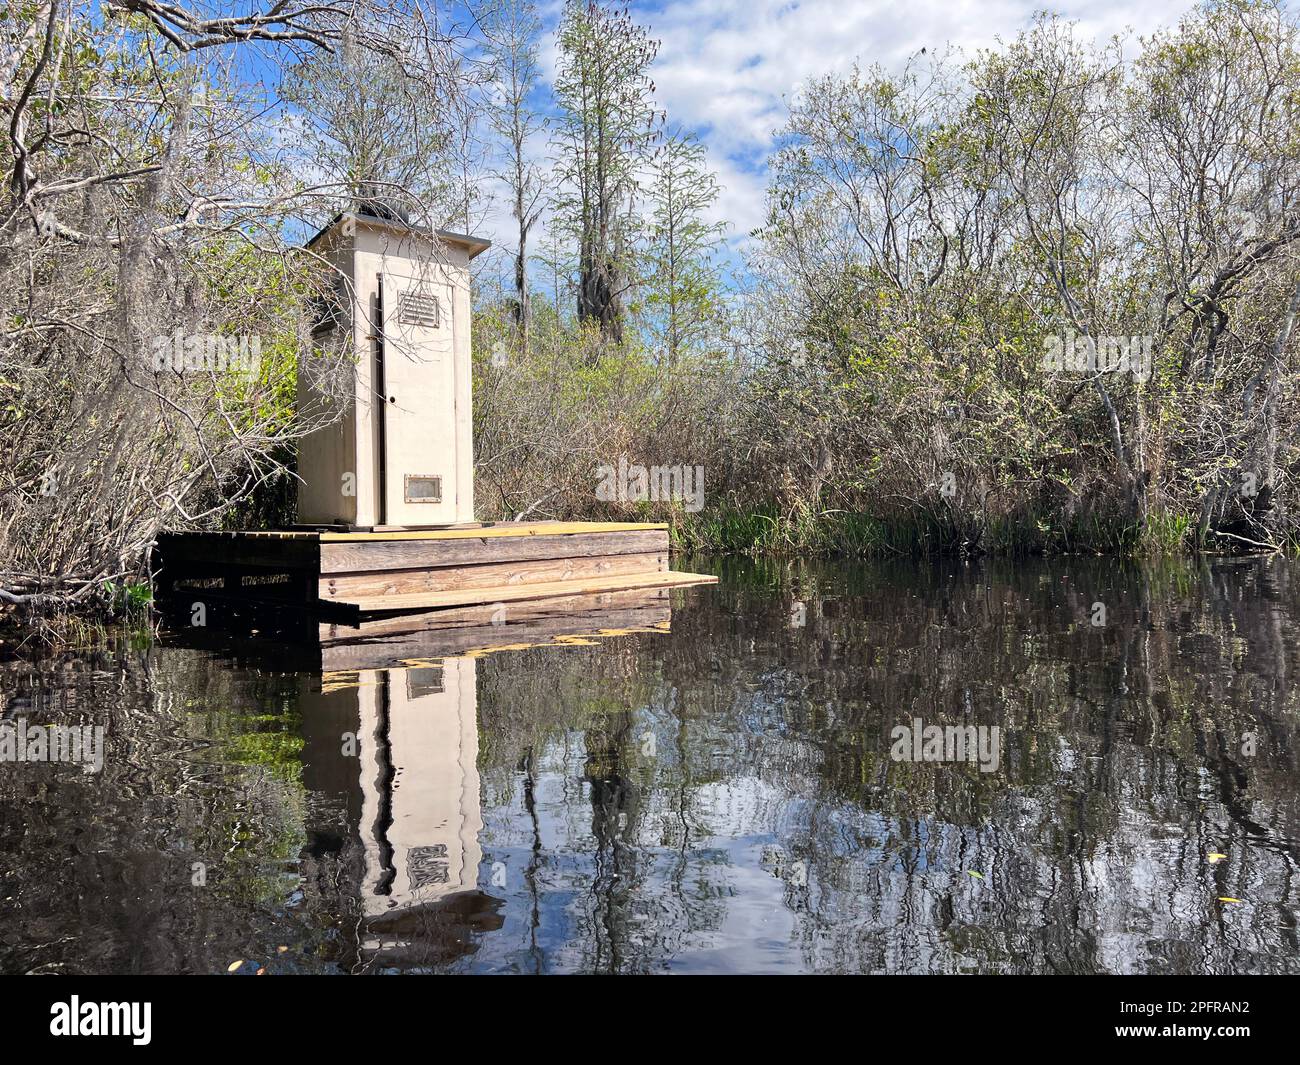 Restroom lavatory facilities seen from the water in Okefenokee National Wildlife Refuge, North America's largest blackwater swamp. Stock Photo